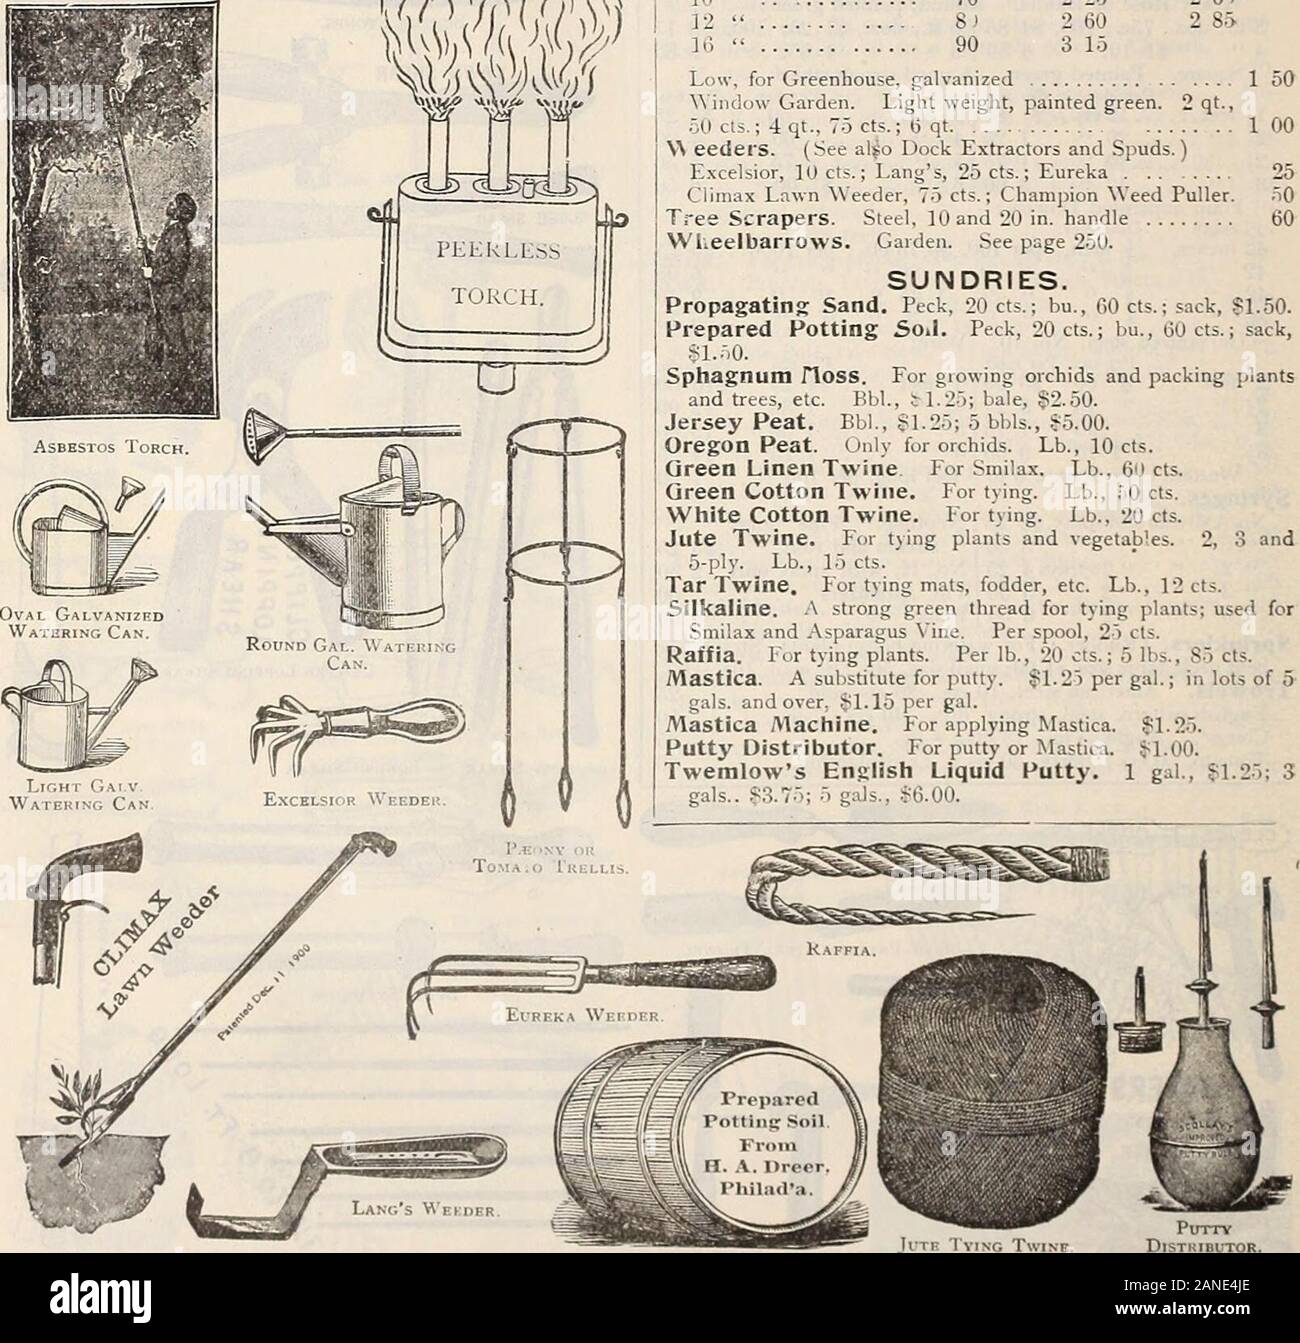 Dreer's 72nd annual edition garden book : 1910 . W w W. Thermometers. While we use great care in the packing of Thermometers for shipment, they travel at purchasers risk. Dreers Sj)ecial, oxydized scale Jl 00 Tin, japanned, 8 in., 1 i cts.; 10 in 25 Tin, tested, 8 in., 60 cts.; 10 in , 75 cts.; 12 in Copper case, tested, 8 in., 85 cts.; 10 in Conserraiory, porcelain, scale, large figures . .Self-registering, tin case, .2.50; porcelain copper case.Hotbed or Mushroom, iron point, ^il.OU; brass point . .Dairy , Torch, for burning caterpillars nests. Asbestos, 40cts.; Peei less . Trellts. Pi^ony Stock Photo